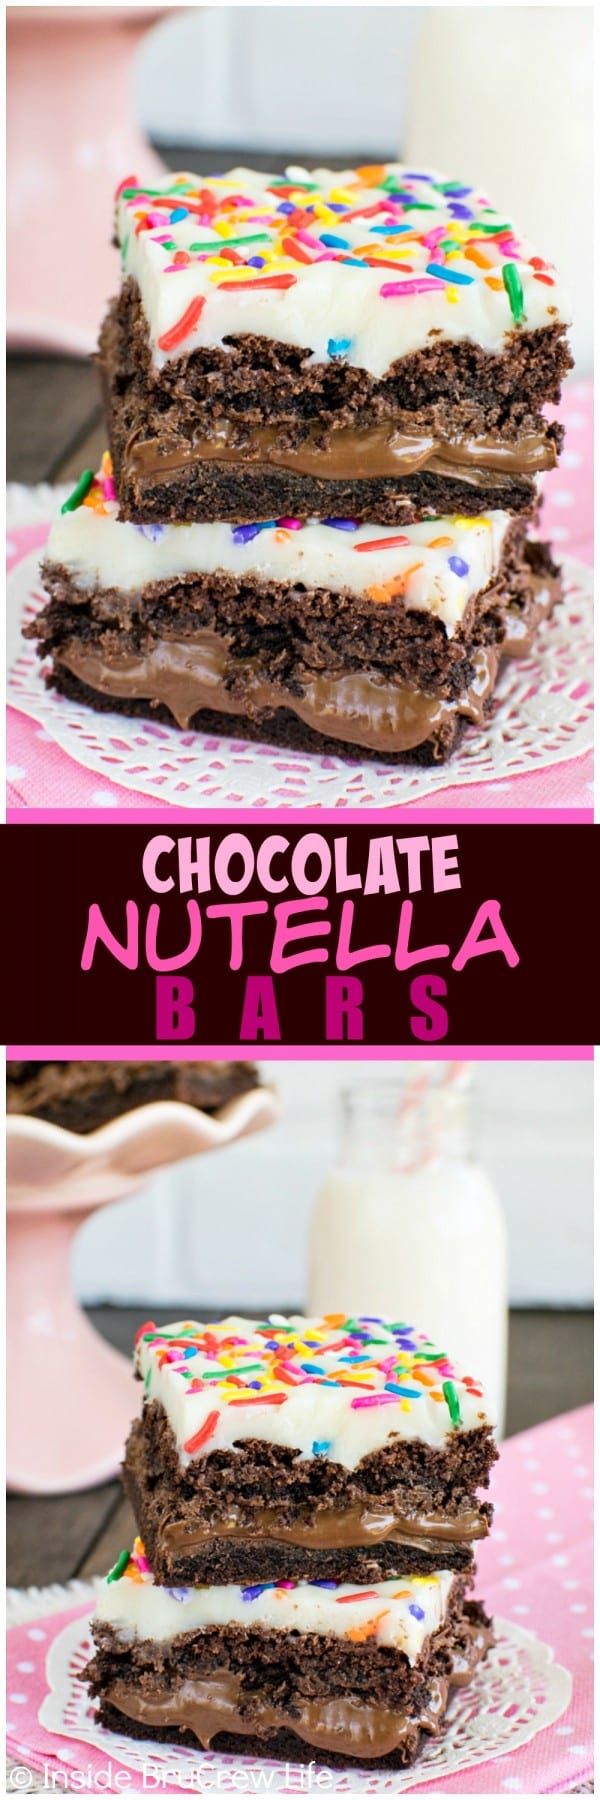 Chocolate Nutella Bars - the creamy chocolate center and white chocolate topping give these easy bars a fun twist! Great dessert recipe!